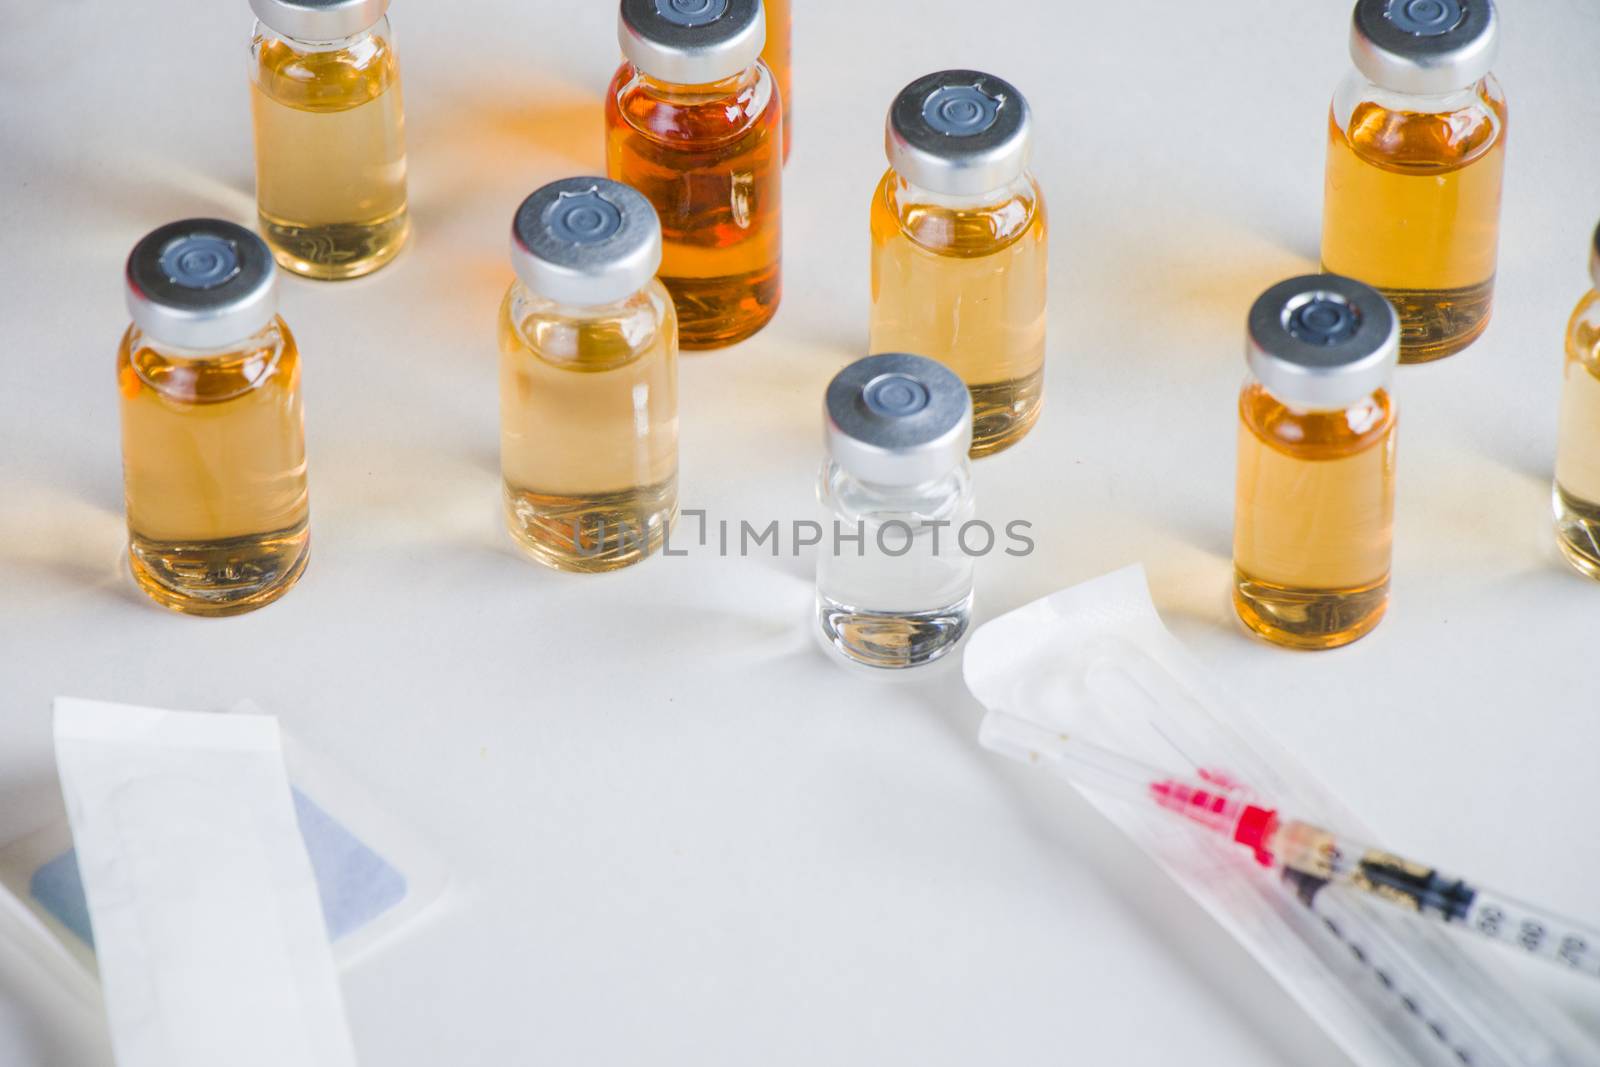 New vaccine in ampules and bottles, needle, glove and safety glass. by Taidundua